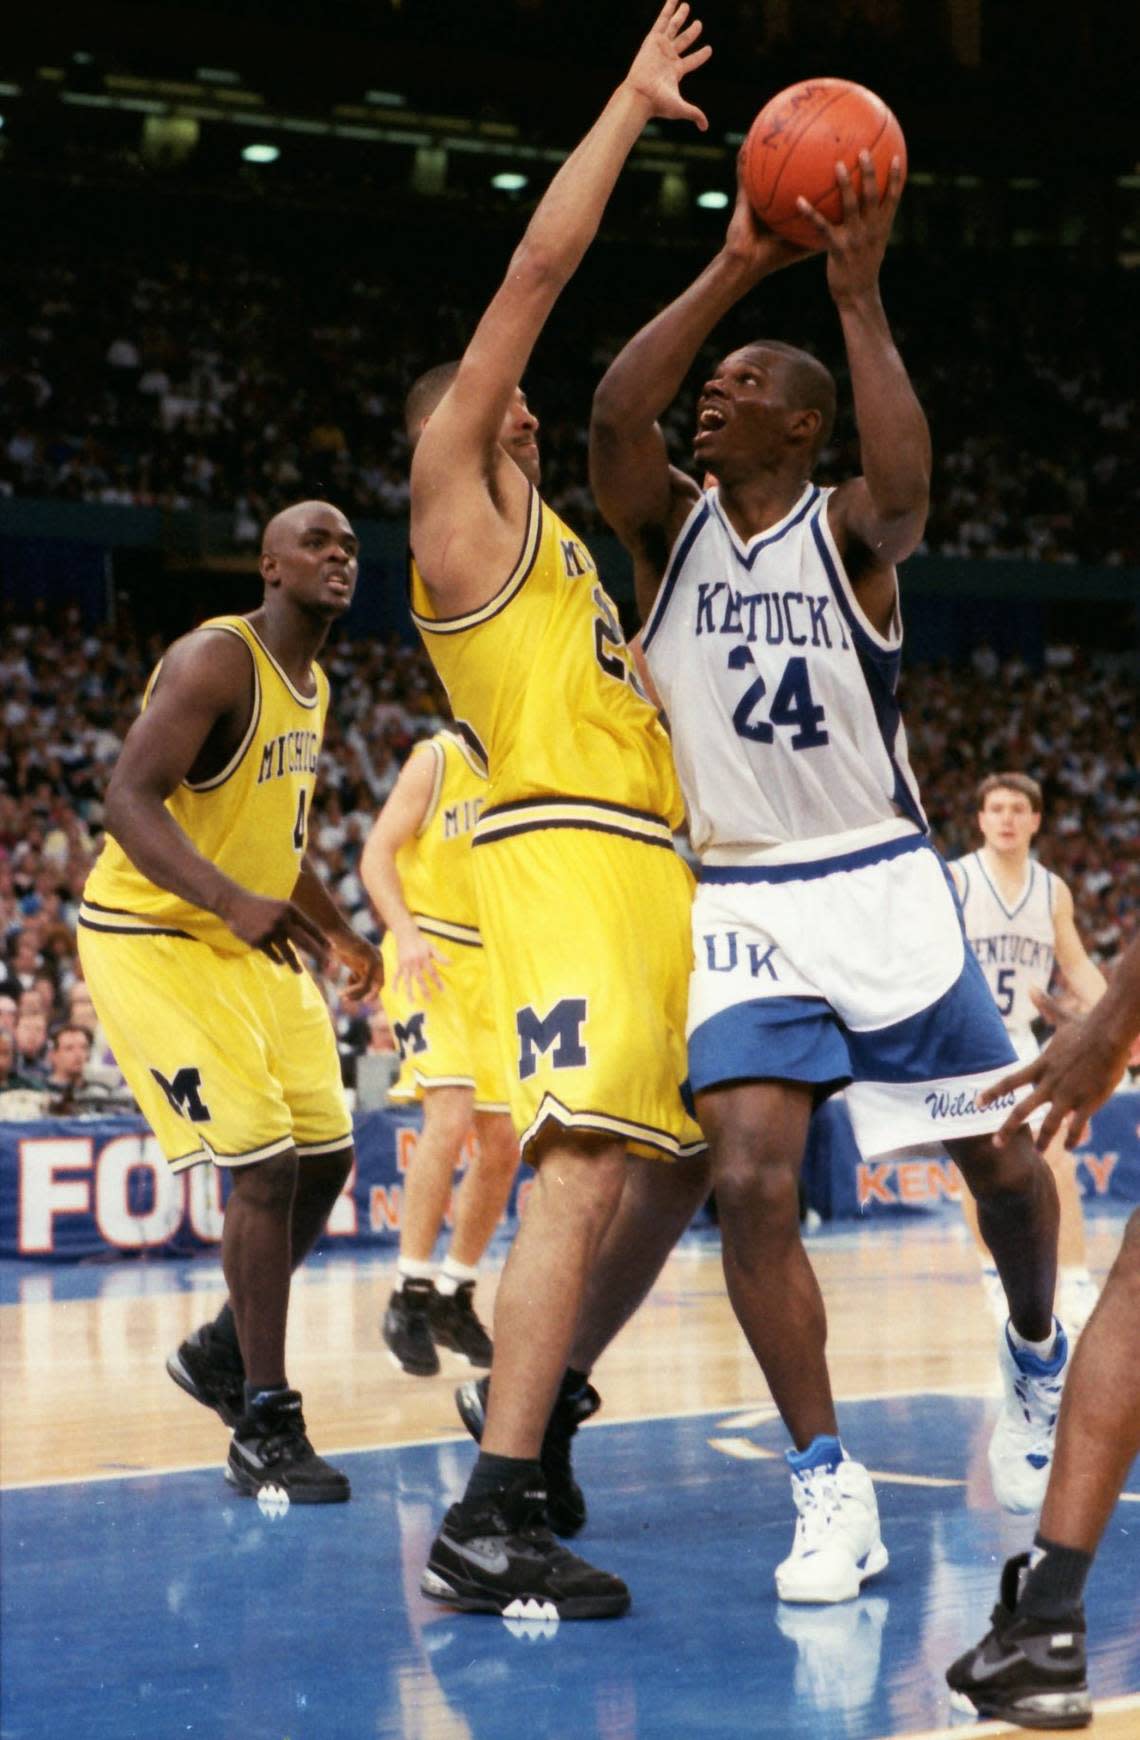 Kentucky star Jamal Mashburn tried to score in the lane against Michigan’s Juwan Howard in UK’s 81-78 overtime loss to the Wolverines in the 1993 NCAA Tournament Final Four. Howard is now the Michigan head coach.